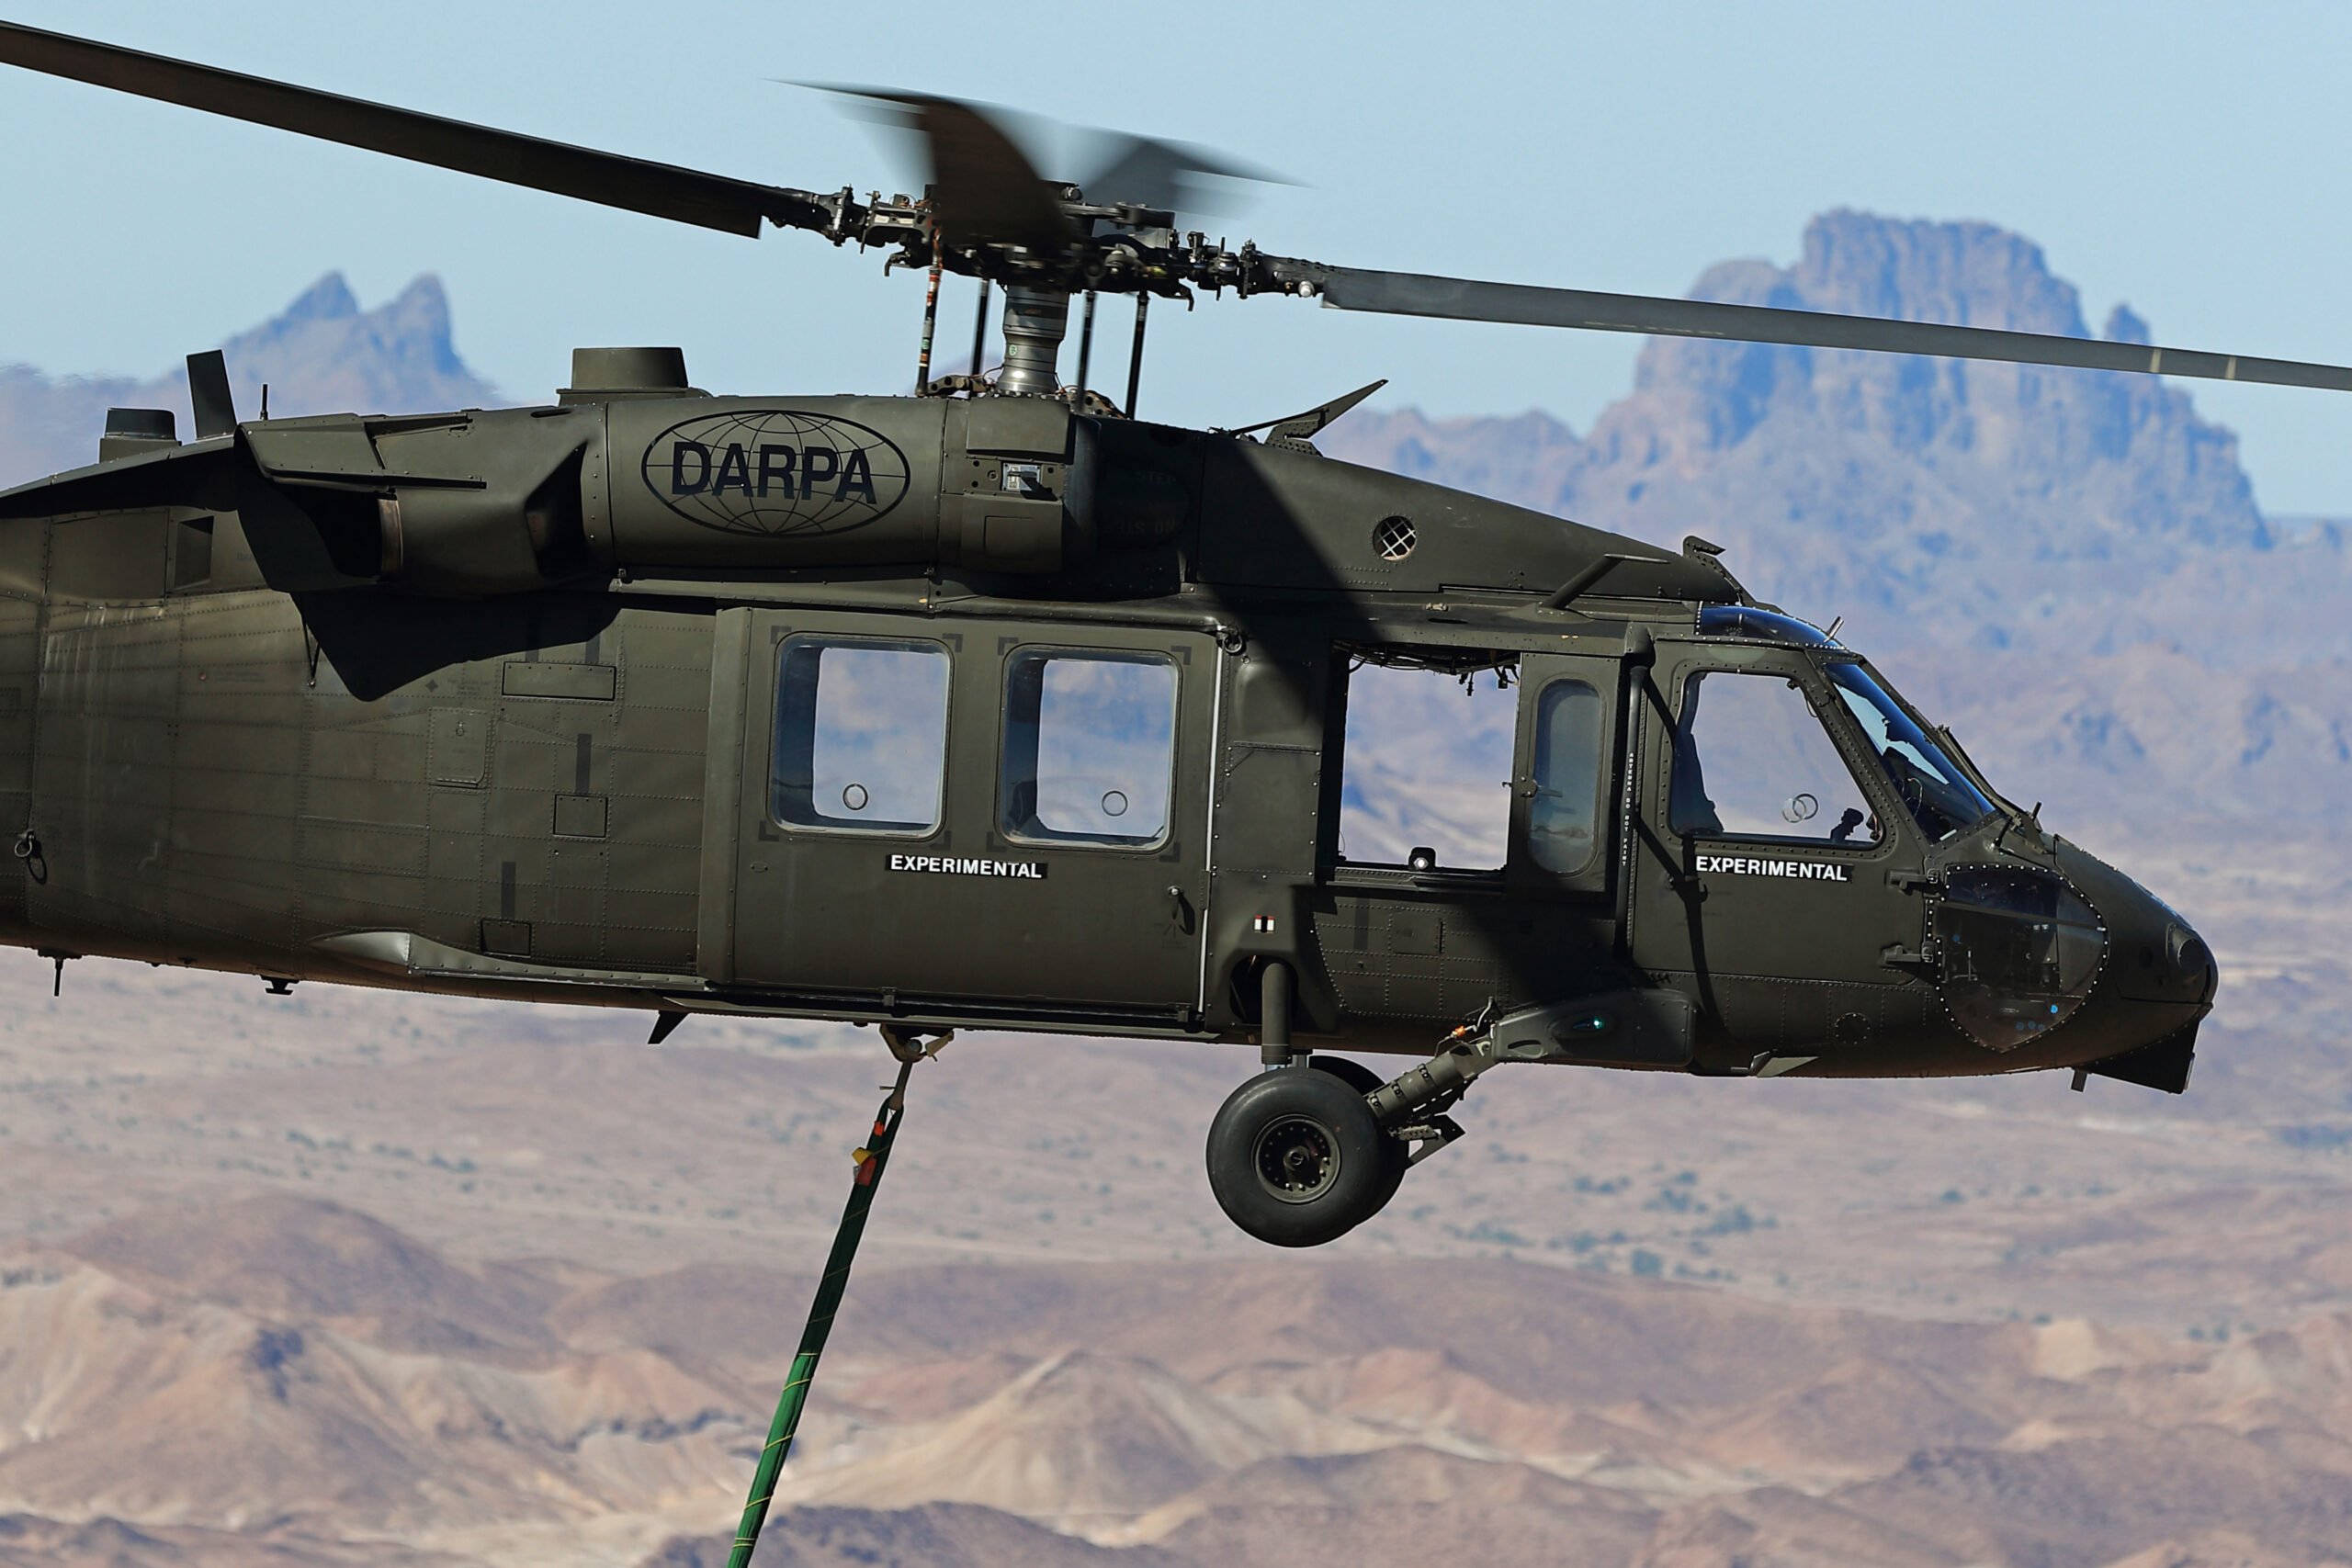 DARPA and Lockheed Martin Sikorsky fly the optionally piloted Black Hawk, which includes the MATRIX autonomy solution. (Lockheed Martin photo)